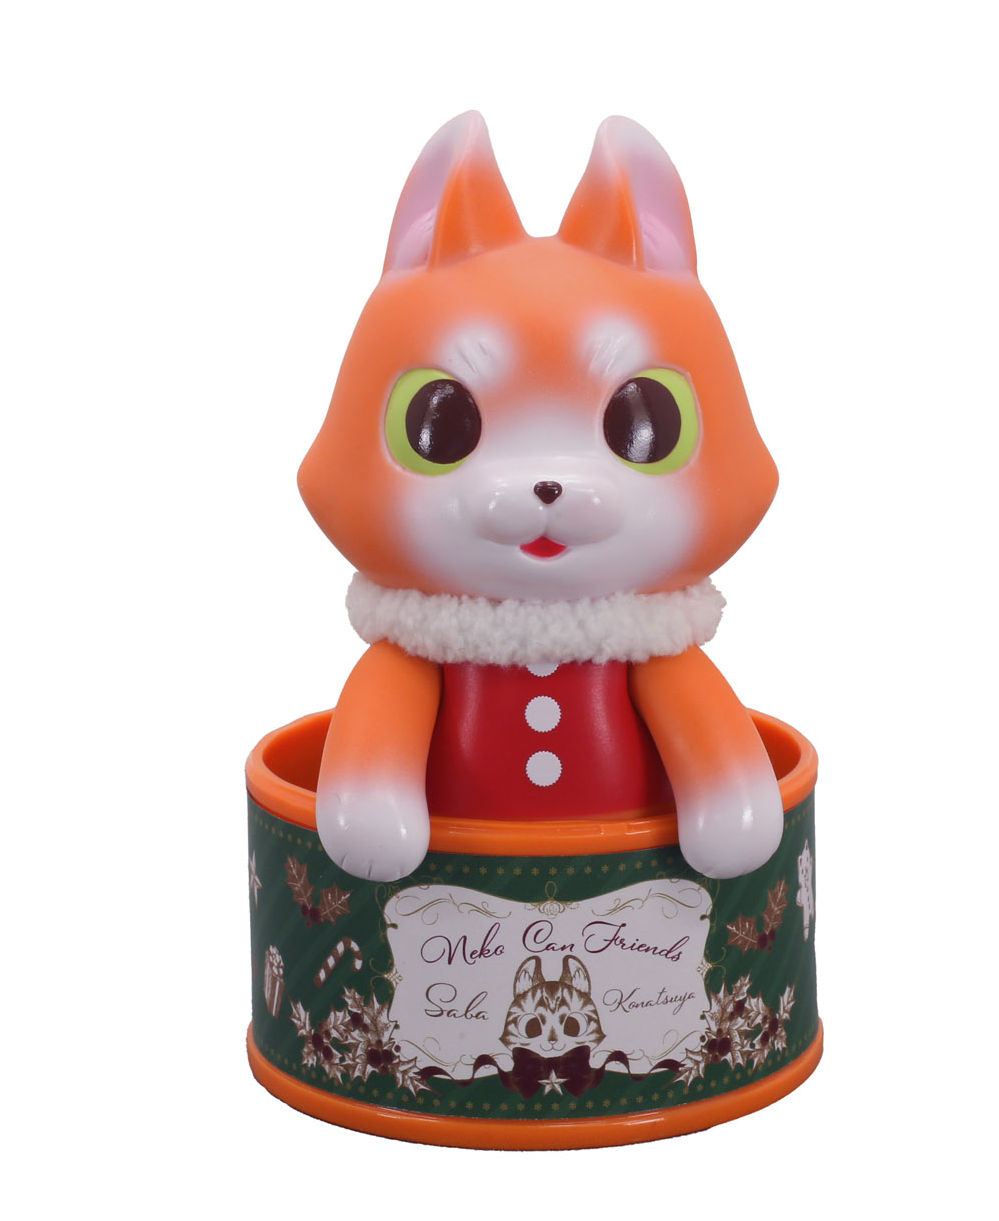 Toy cat figurine in round container, part of Can Cat Friends SABA Christmas Ver by Konatsu, 3.5 inch Sofubi.